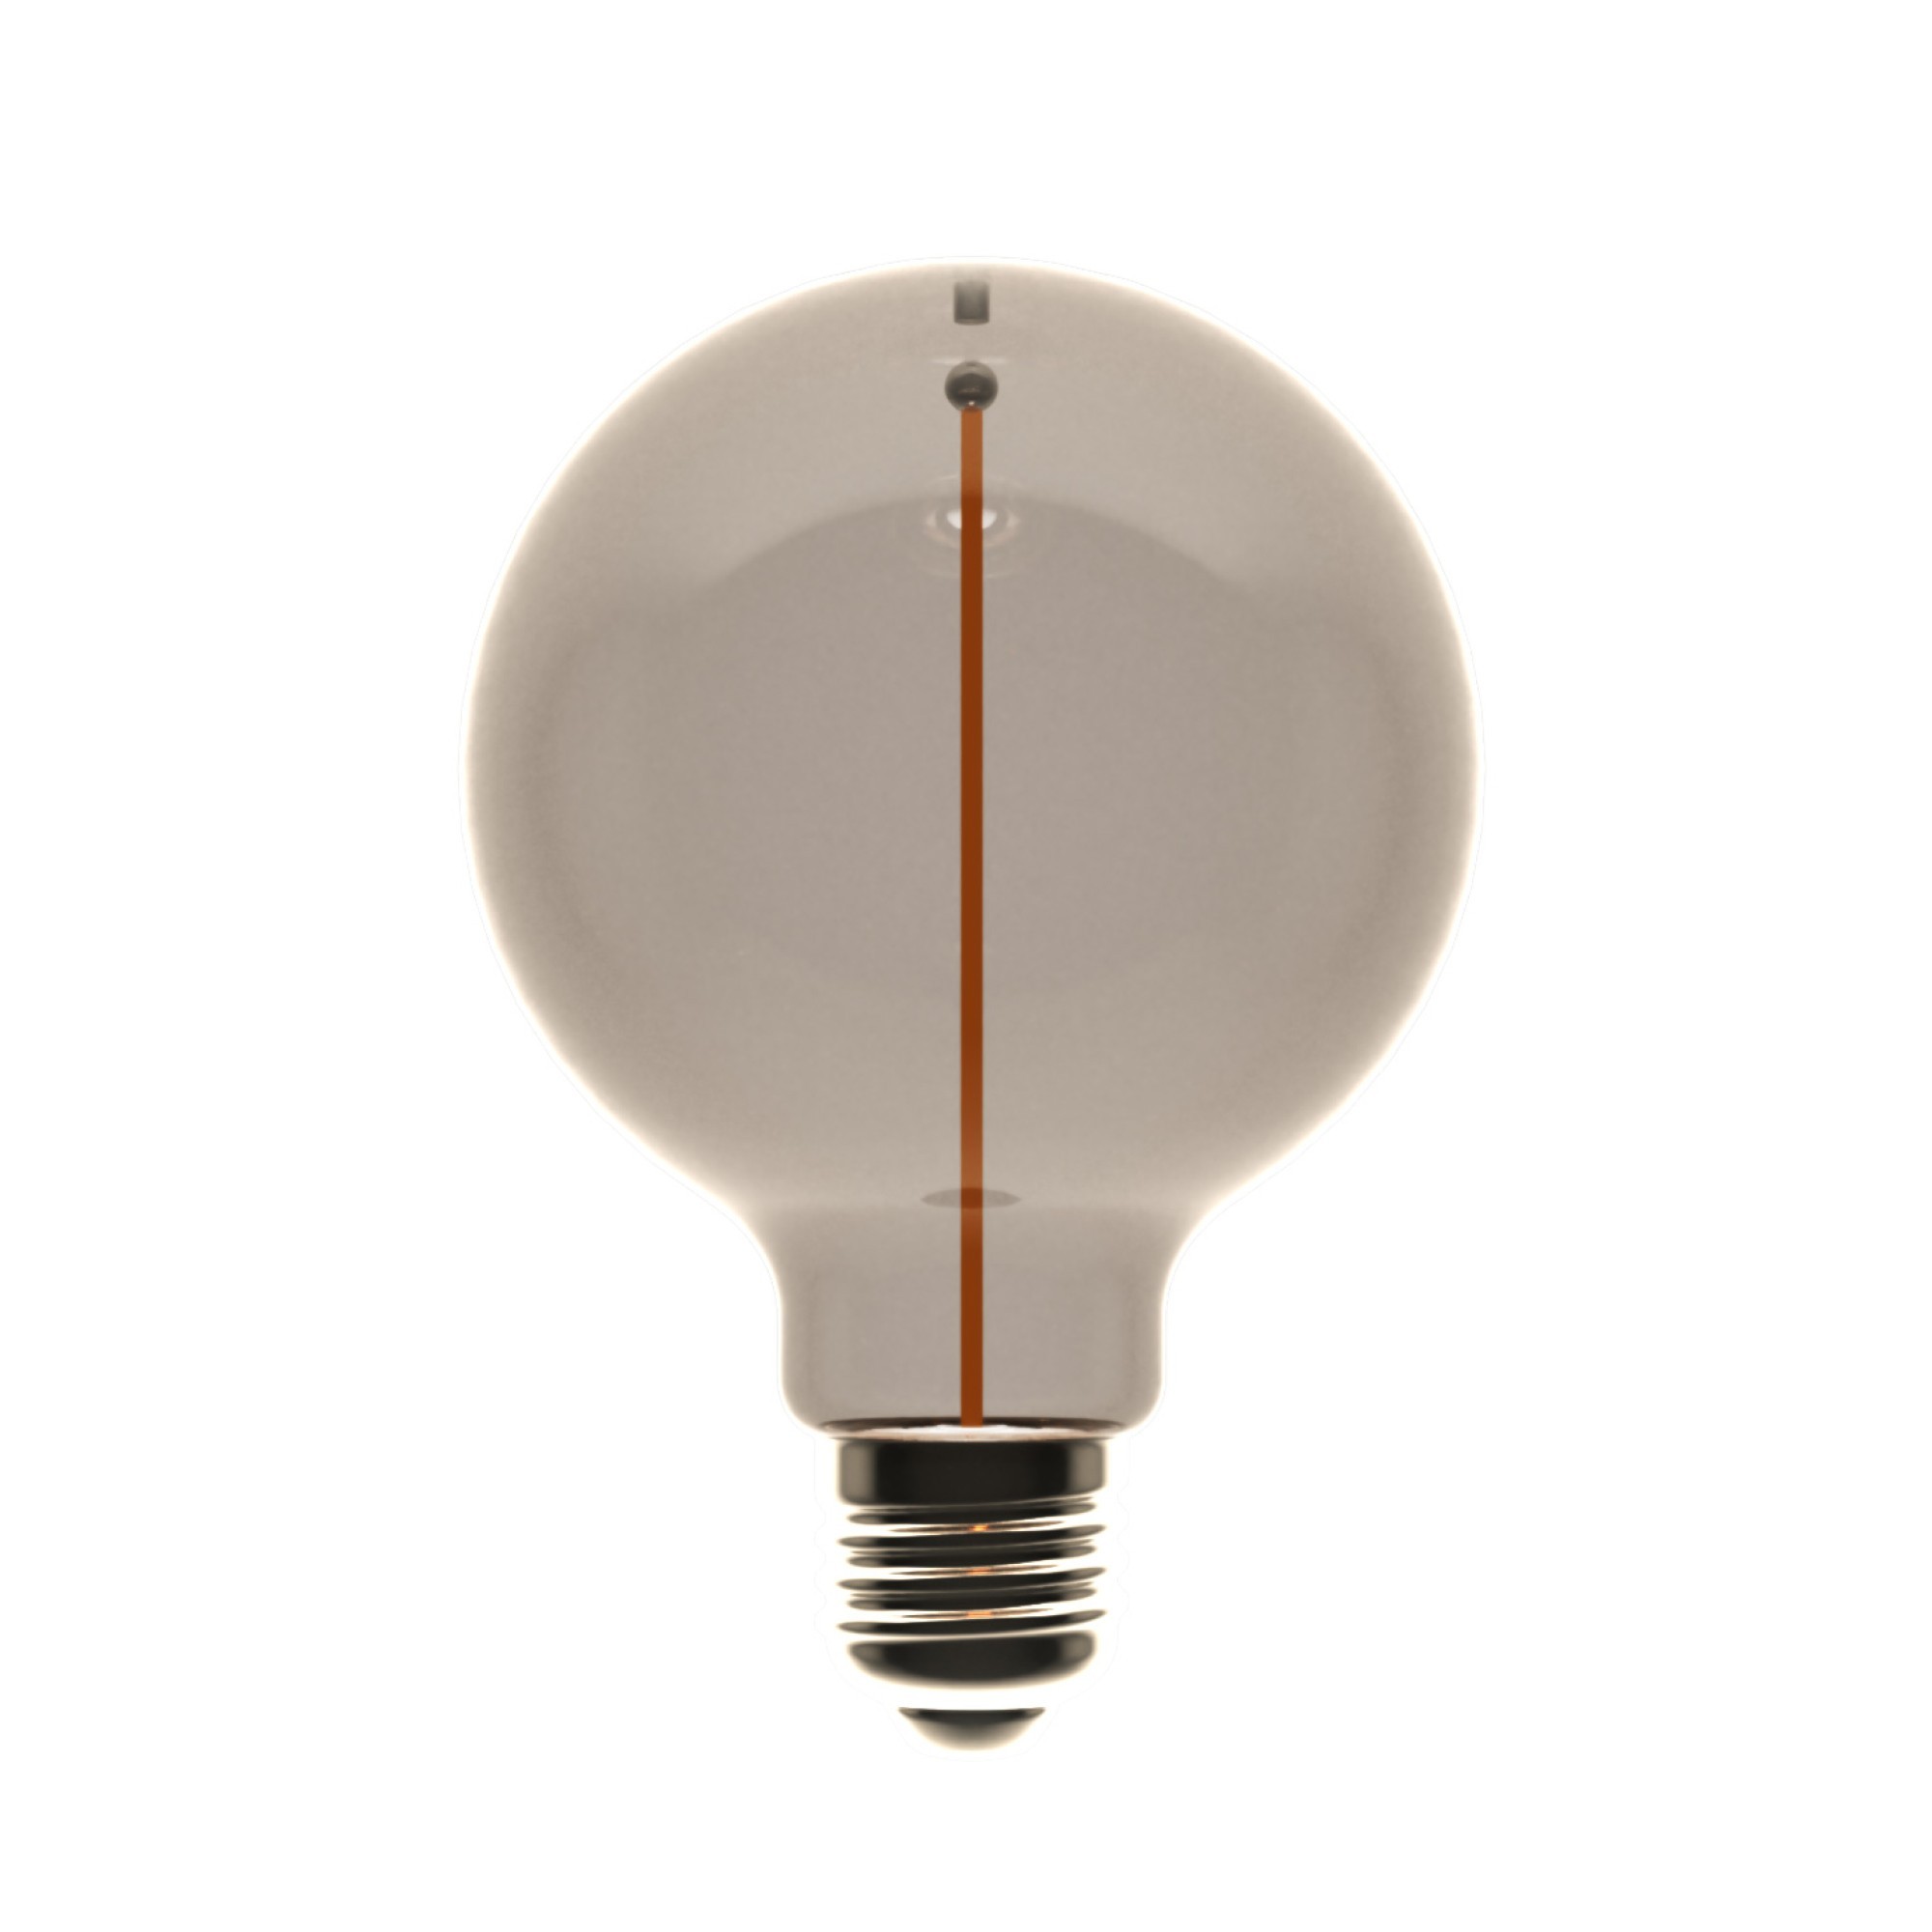 F04 - LED G95 Light Bulb, E27, 2,2W, 1800K, 60Lm, with magnetic filament and smoky glass